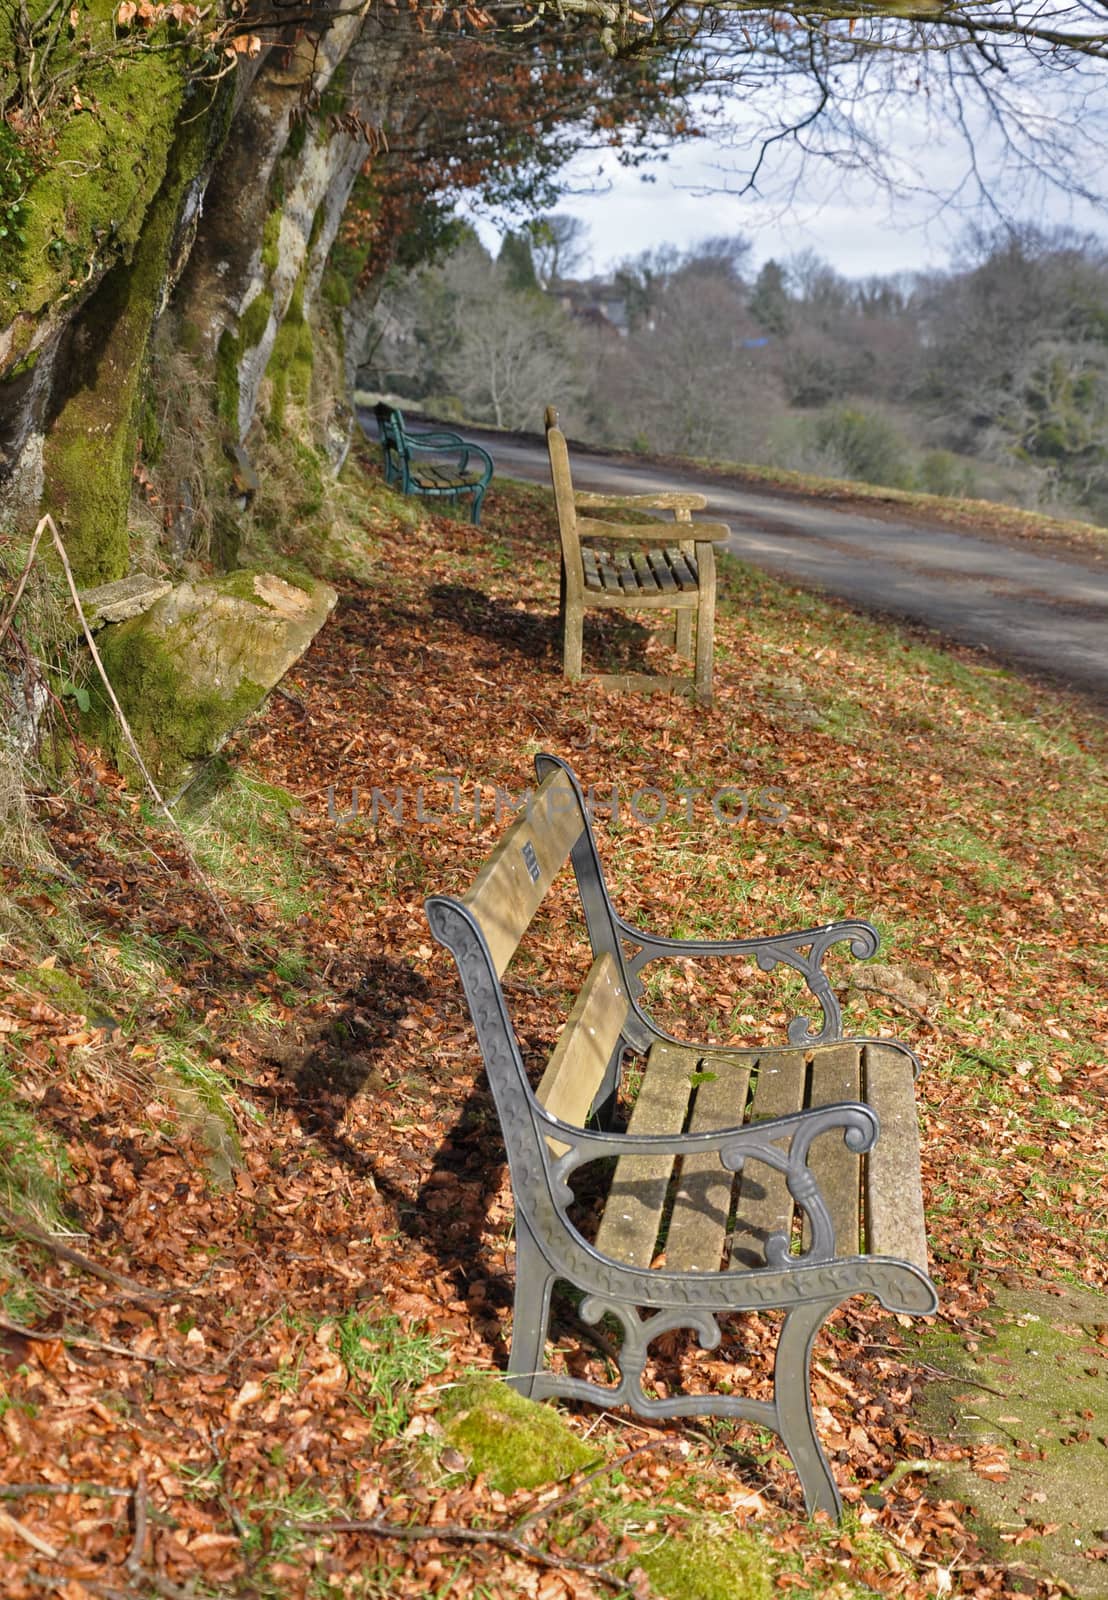 These weathered wooden bench is on the verge next to the village of Belstone, Dartmoor, Devon, England